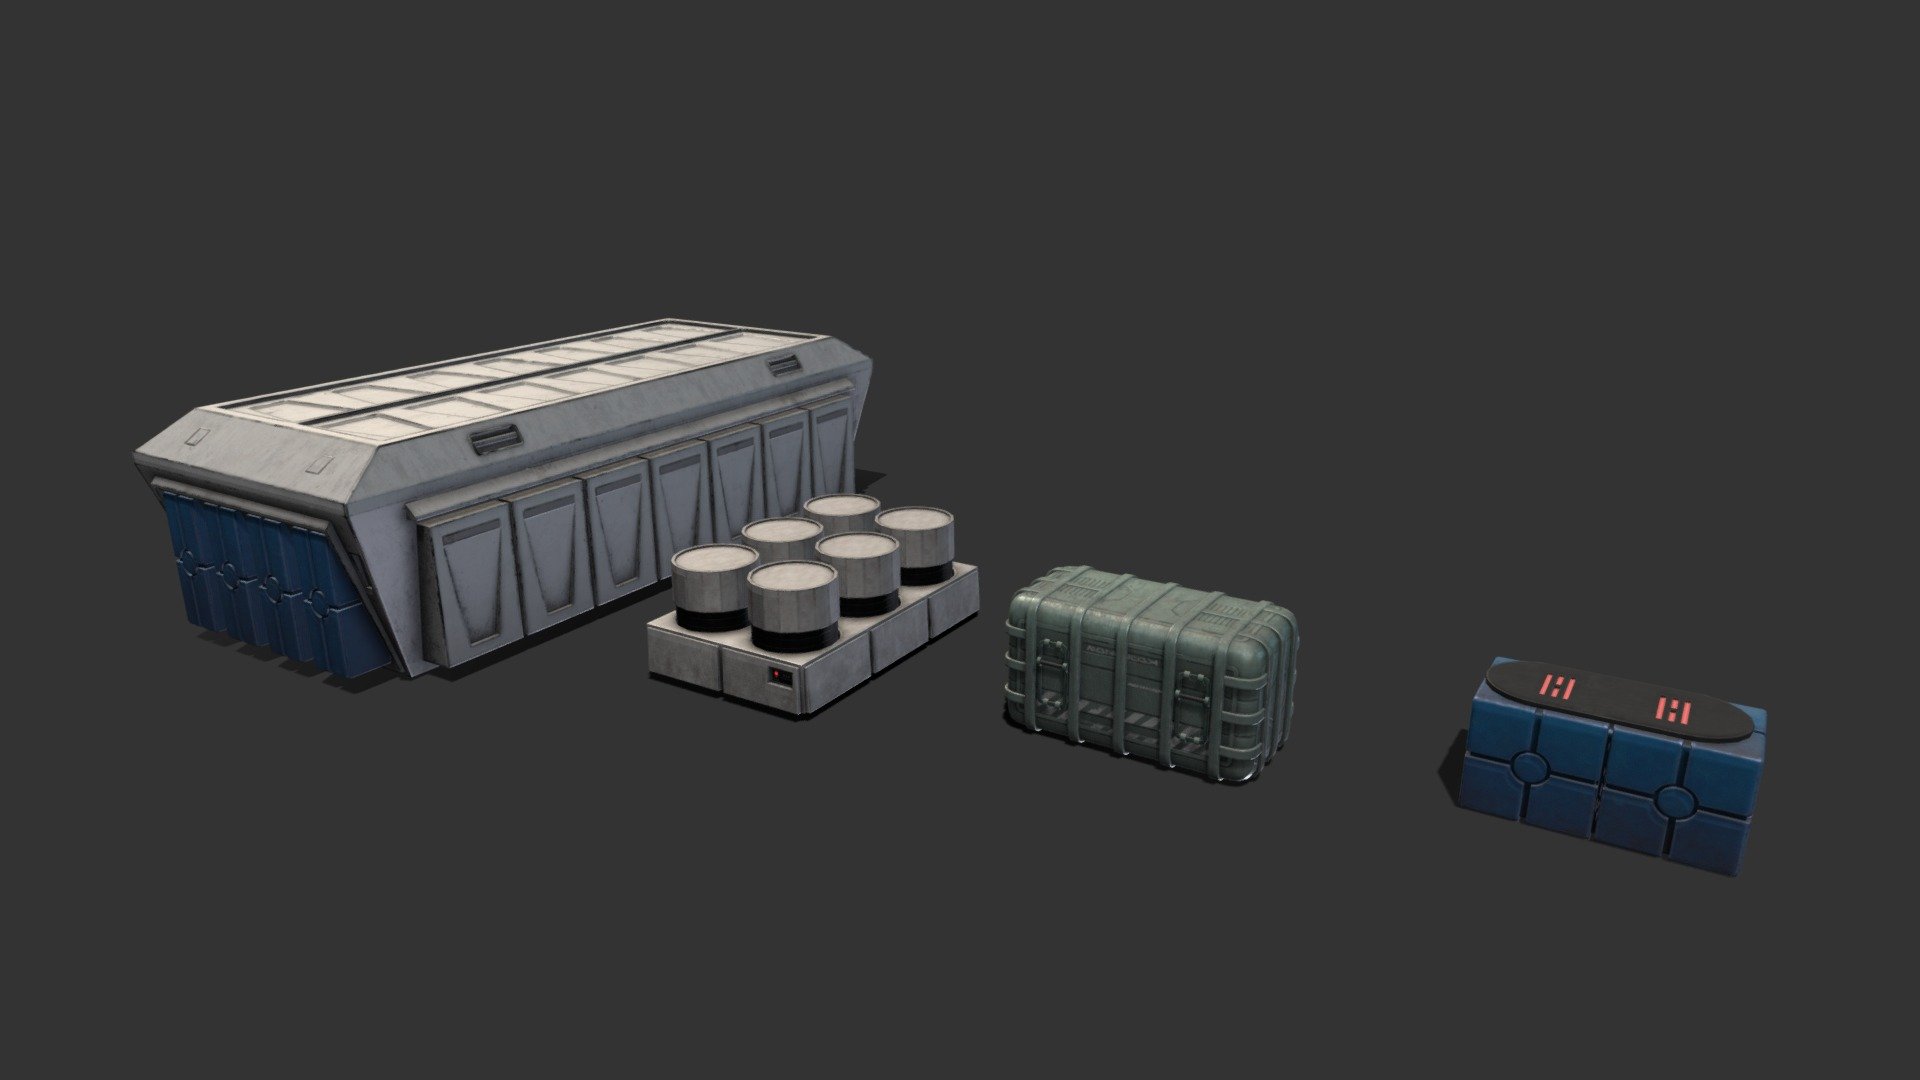 Star wars Imperial Based Set of Crate An containers. 
Realistic 2K PBR textures.
For SetDressing a StarWars Environment.
- Barrel conteiner
- Big Imperial conteiner
- Amunition rounded box
- Blue box - Star Wars Imperial Set - Buy Royalty Free 3D model by Reset (@Reset6) 3d model